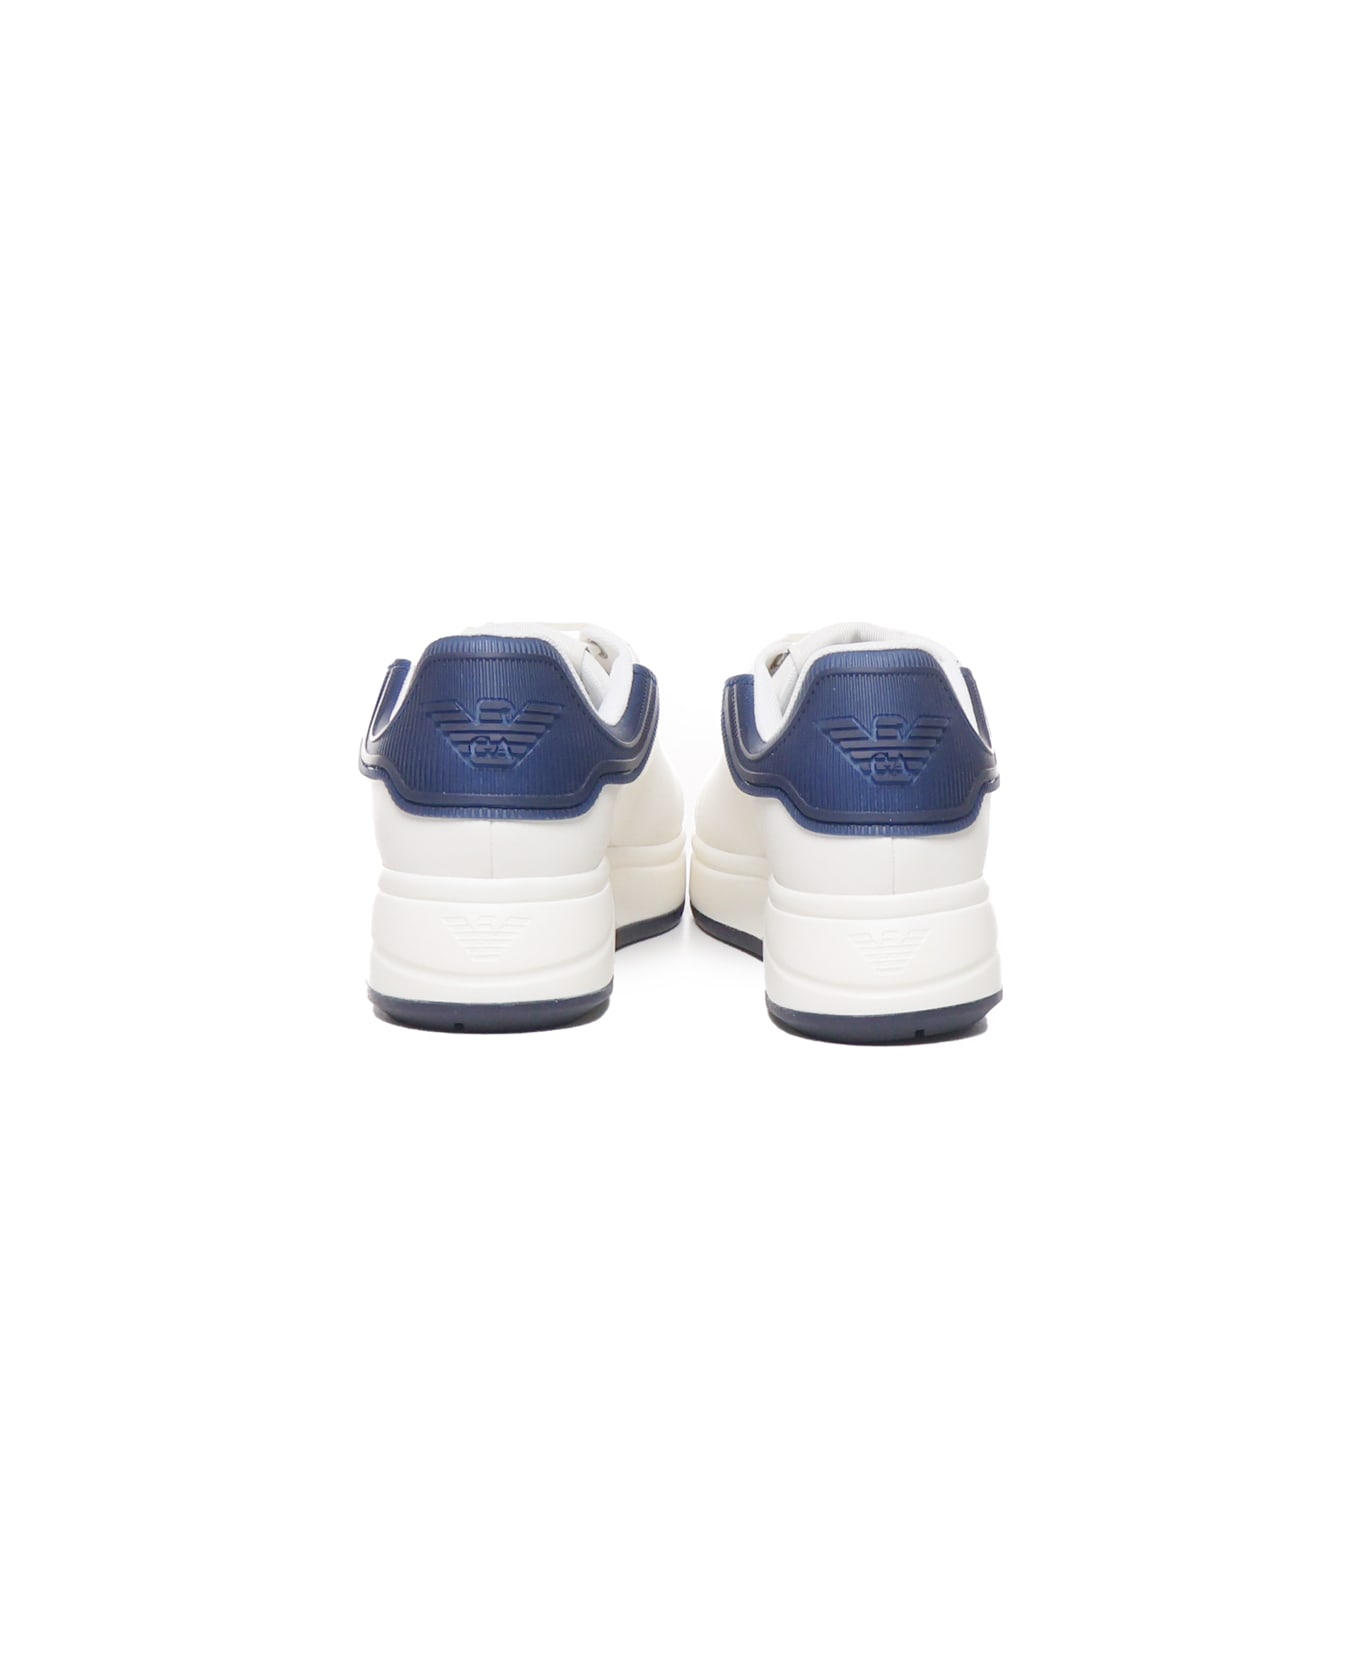 Emporio Armani Sneakers With Contrasting Rivet - Blue スニーカー